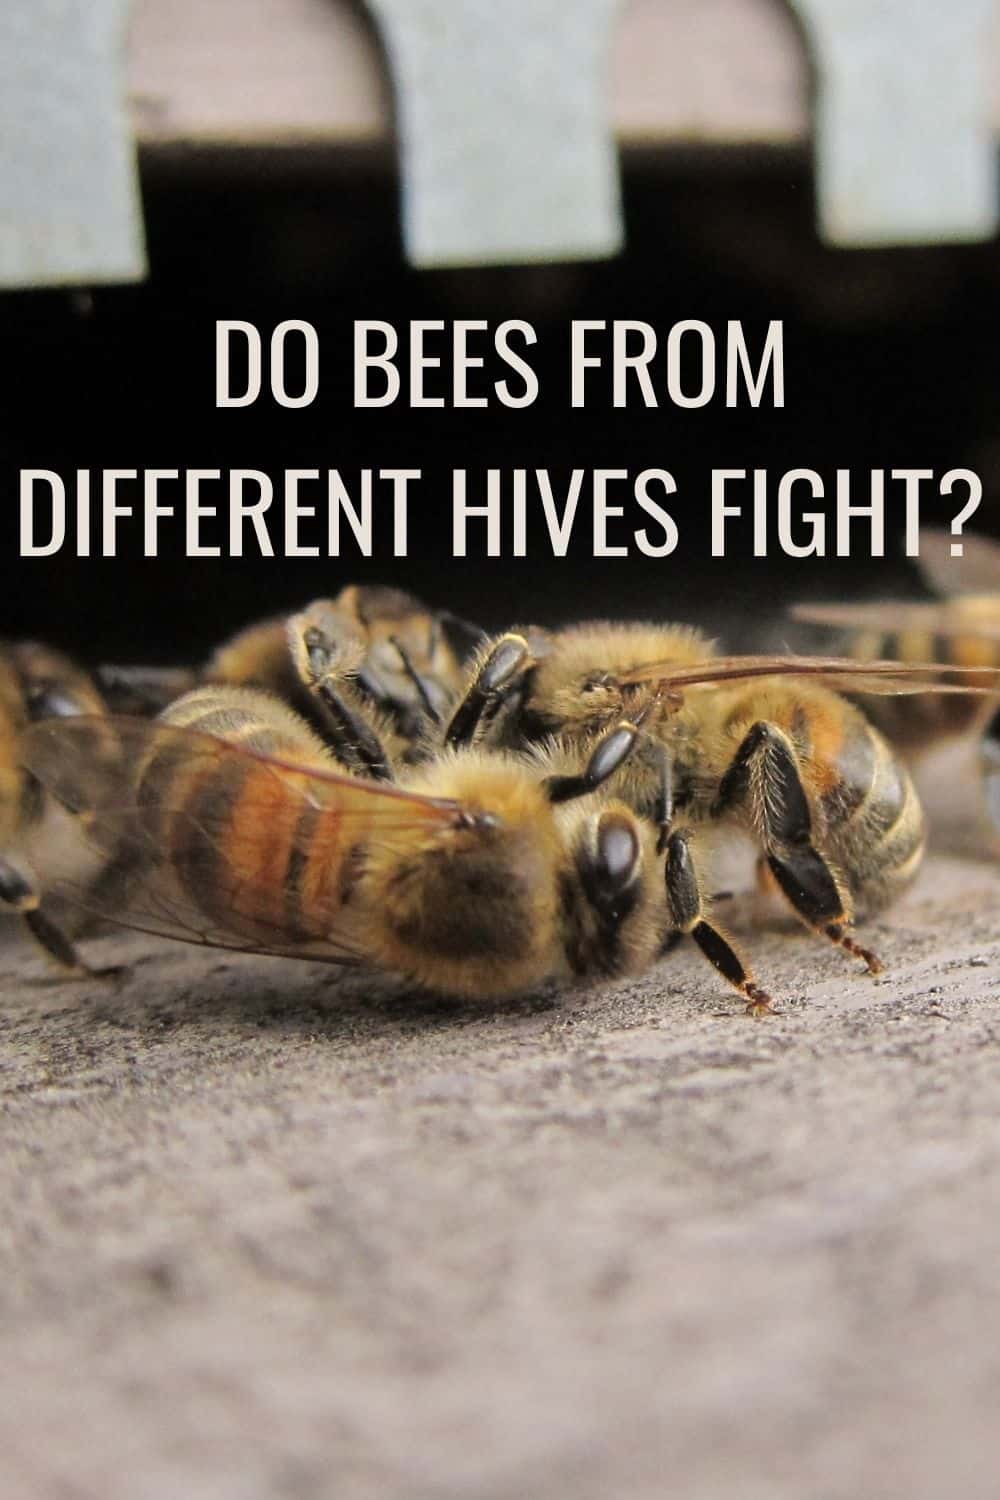 Do bees from different hives fight